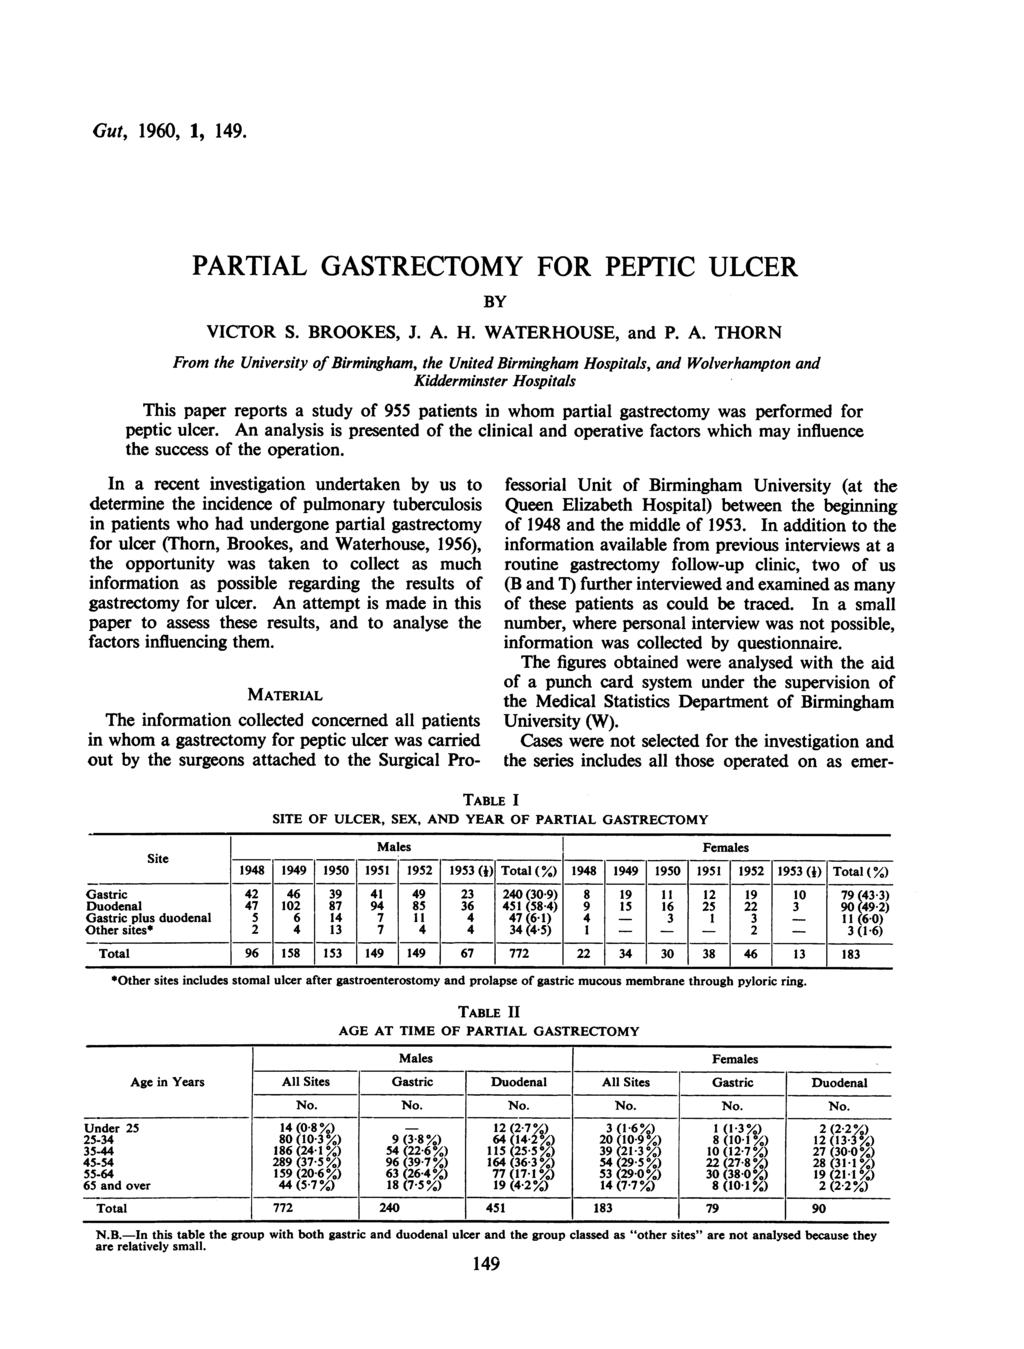 Gut, 1960, 1, 149. PARTIAL GASTRECTOMY FOR PEPTIC ULCER BY VICTOR S. BROOKES, J. A.